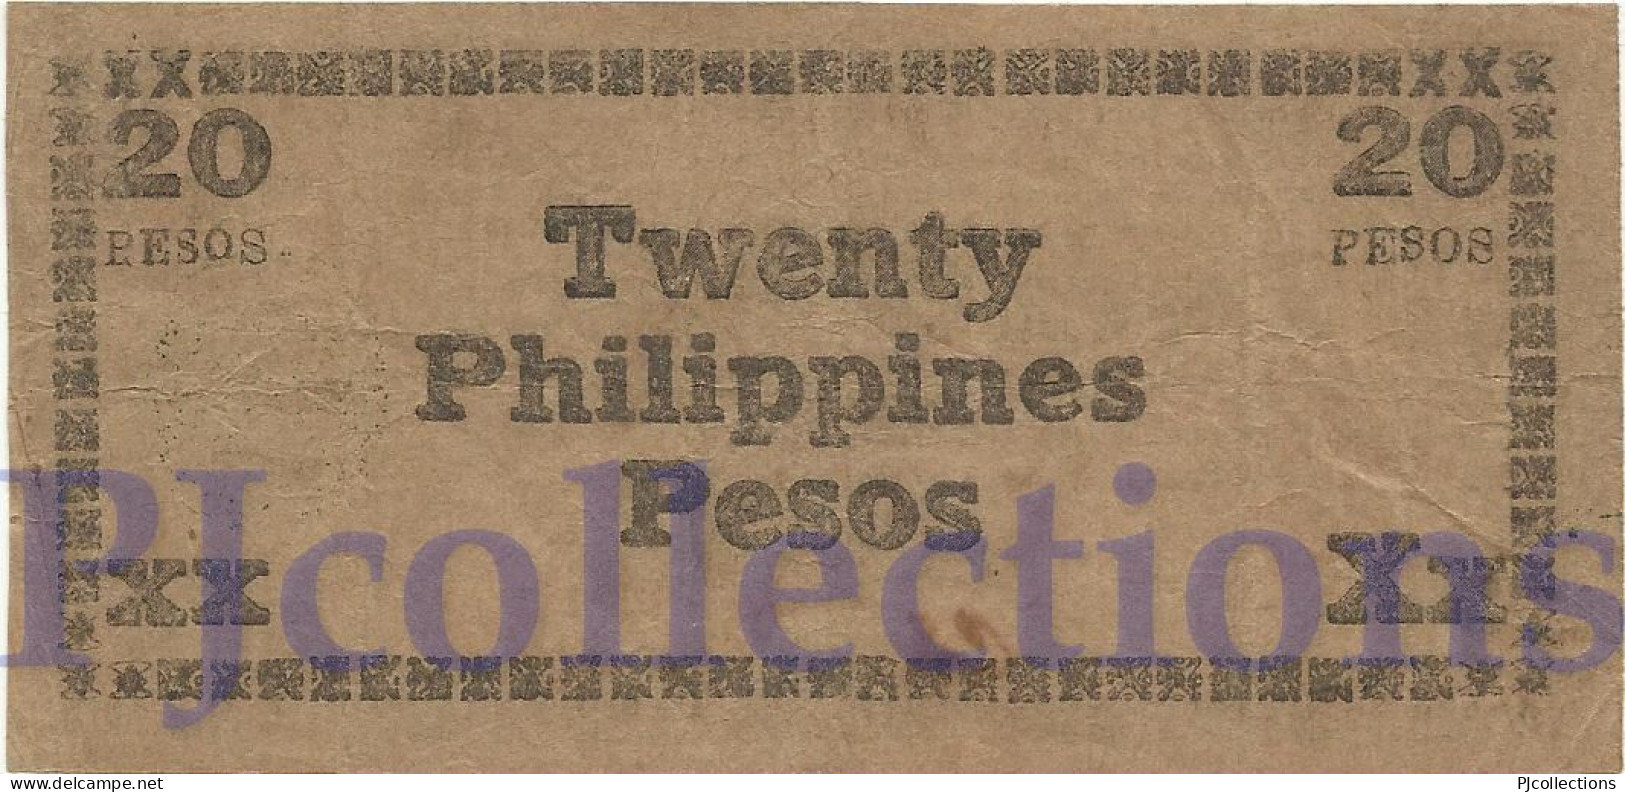 PHILIPPINES 20 PESOS 1944 PICK S680a VF EMERGENCY BANKNOTE - Filipinas